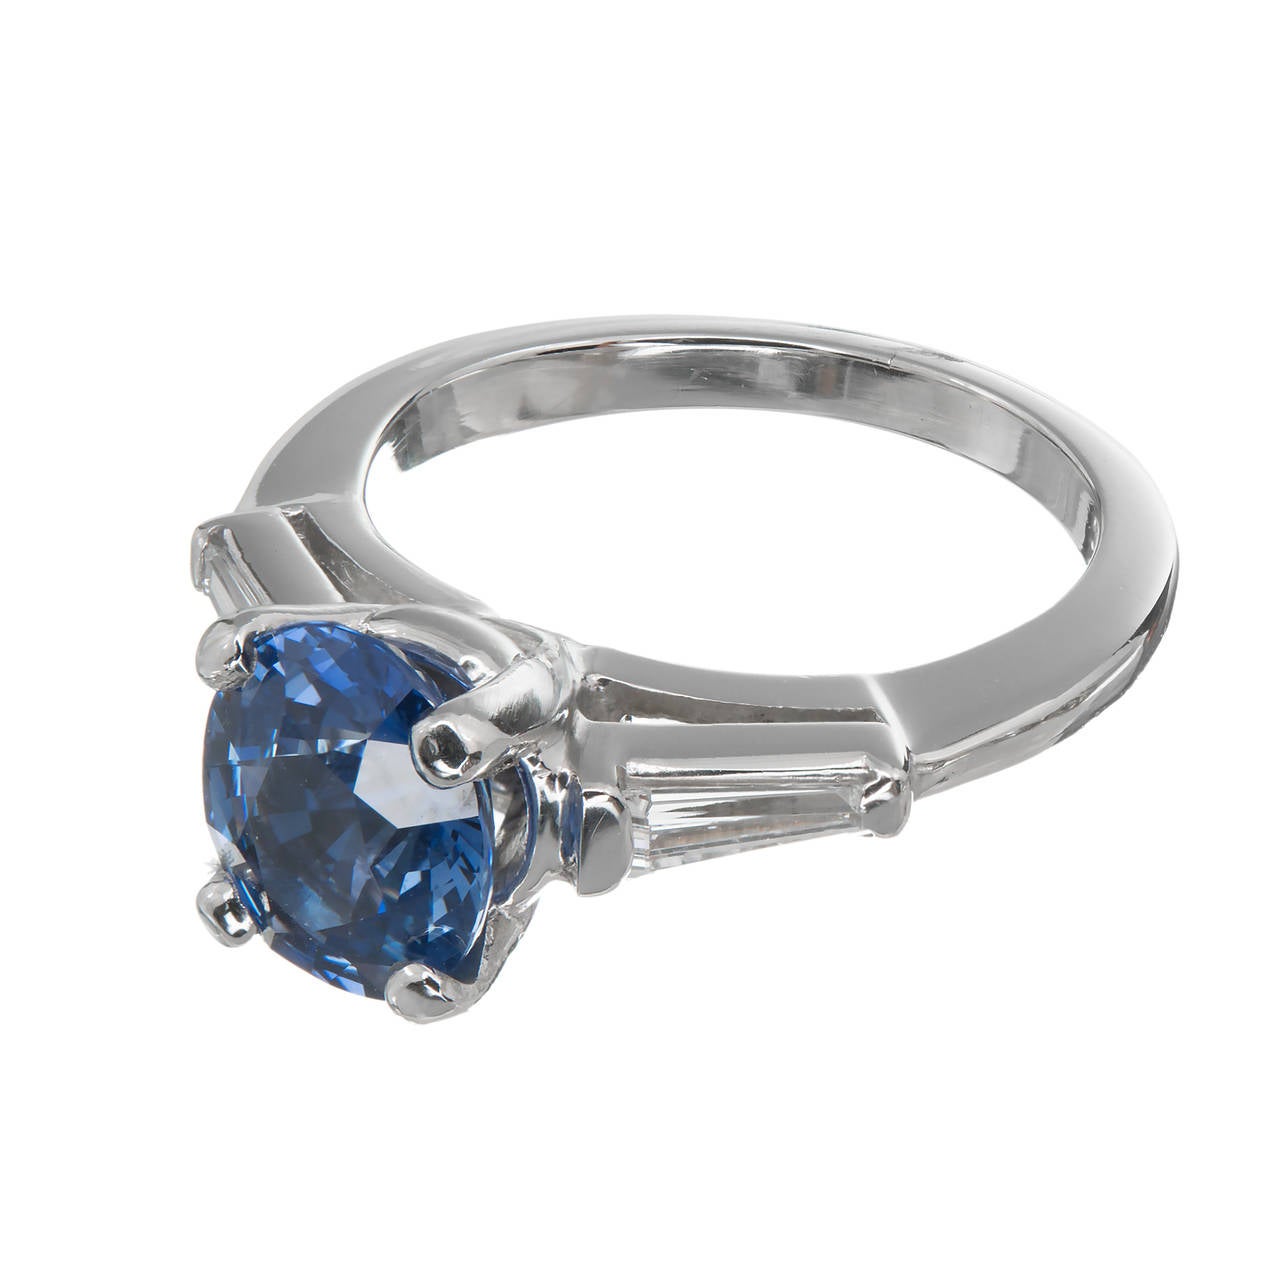 Solid Platinum handmade classic 1950 engagement ring with a bright gem blue all natural no heat 2.03ct Sapphires set with 2 bright white tapered baguette diamonds. 1950 vintage at its best. Center stone removed for certification.

1 oval gem